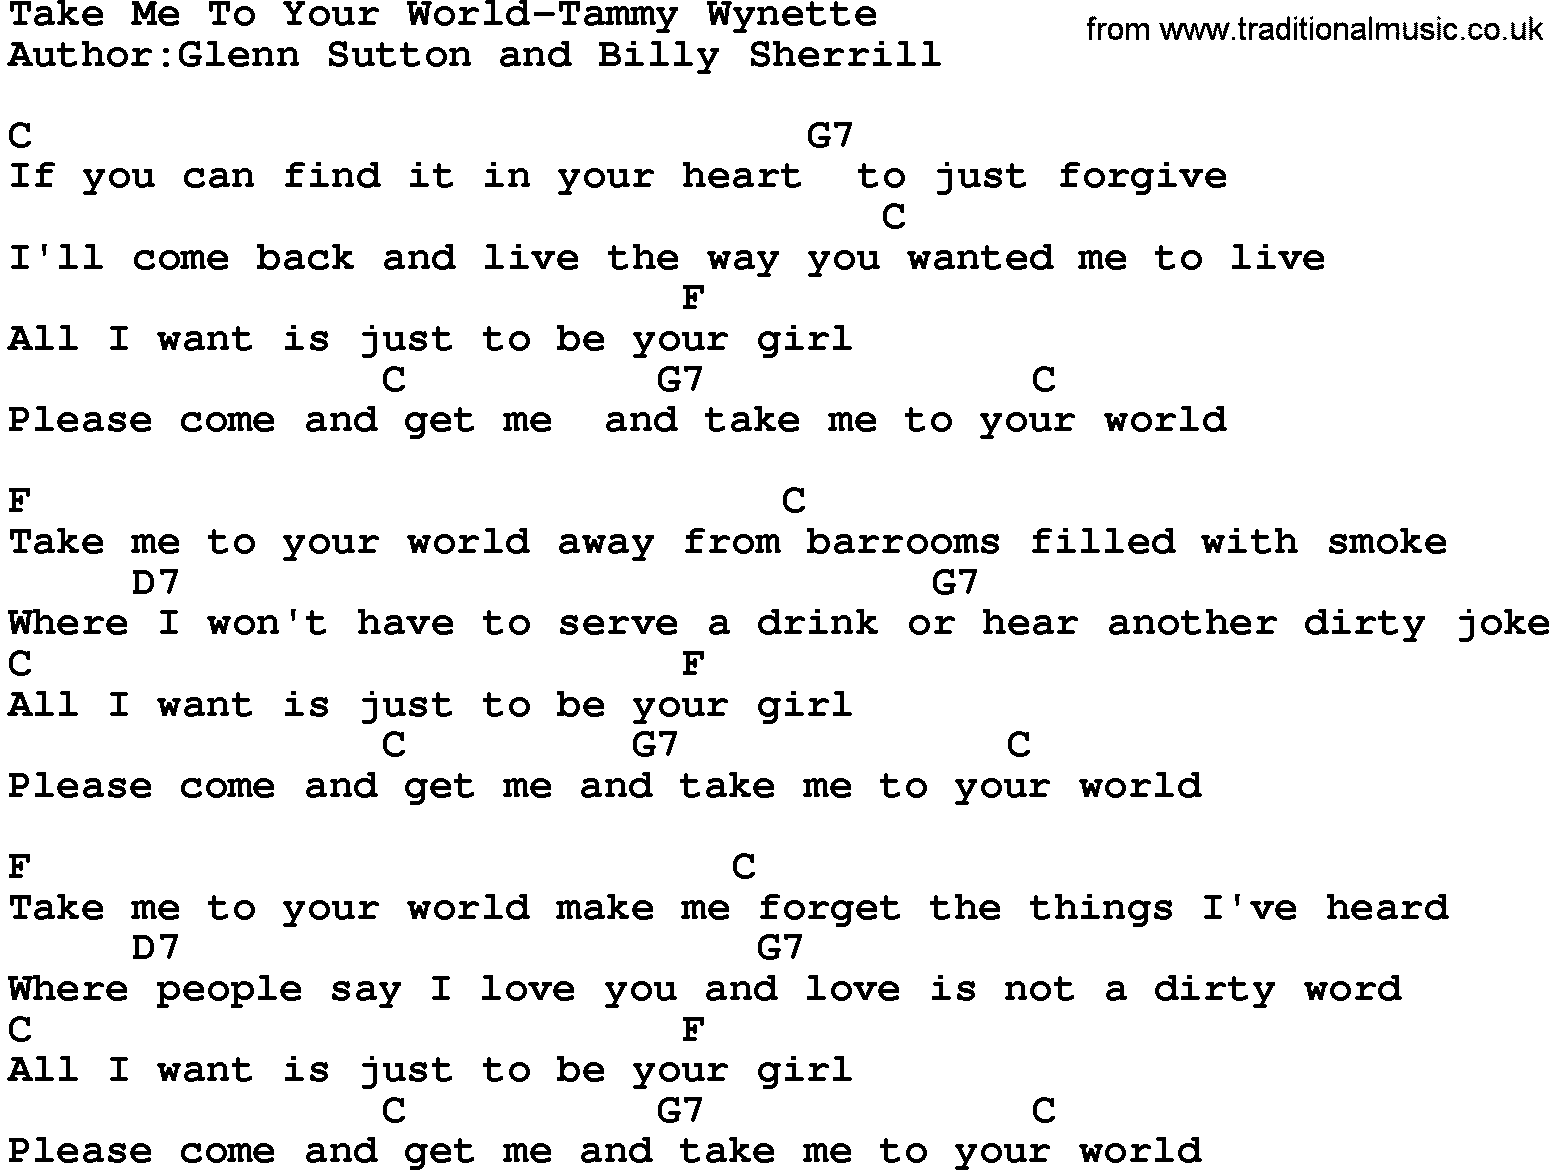 Country music song: Take Me To Your World-Tammy Wynette lyrics and chords